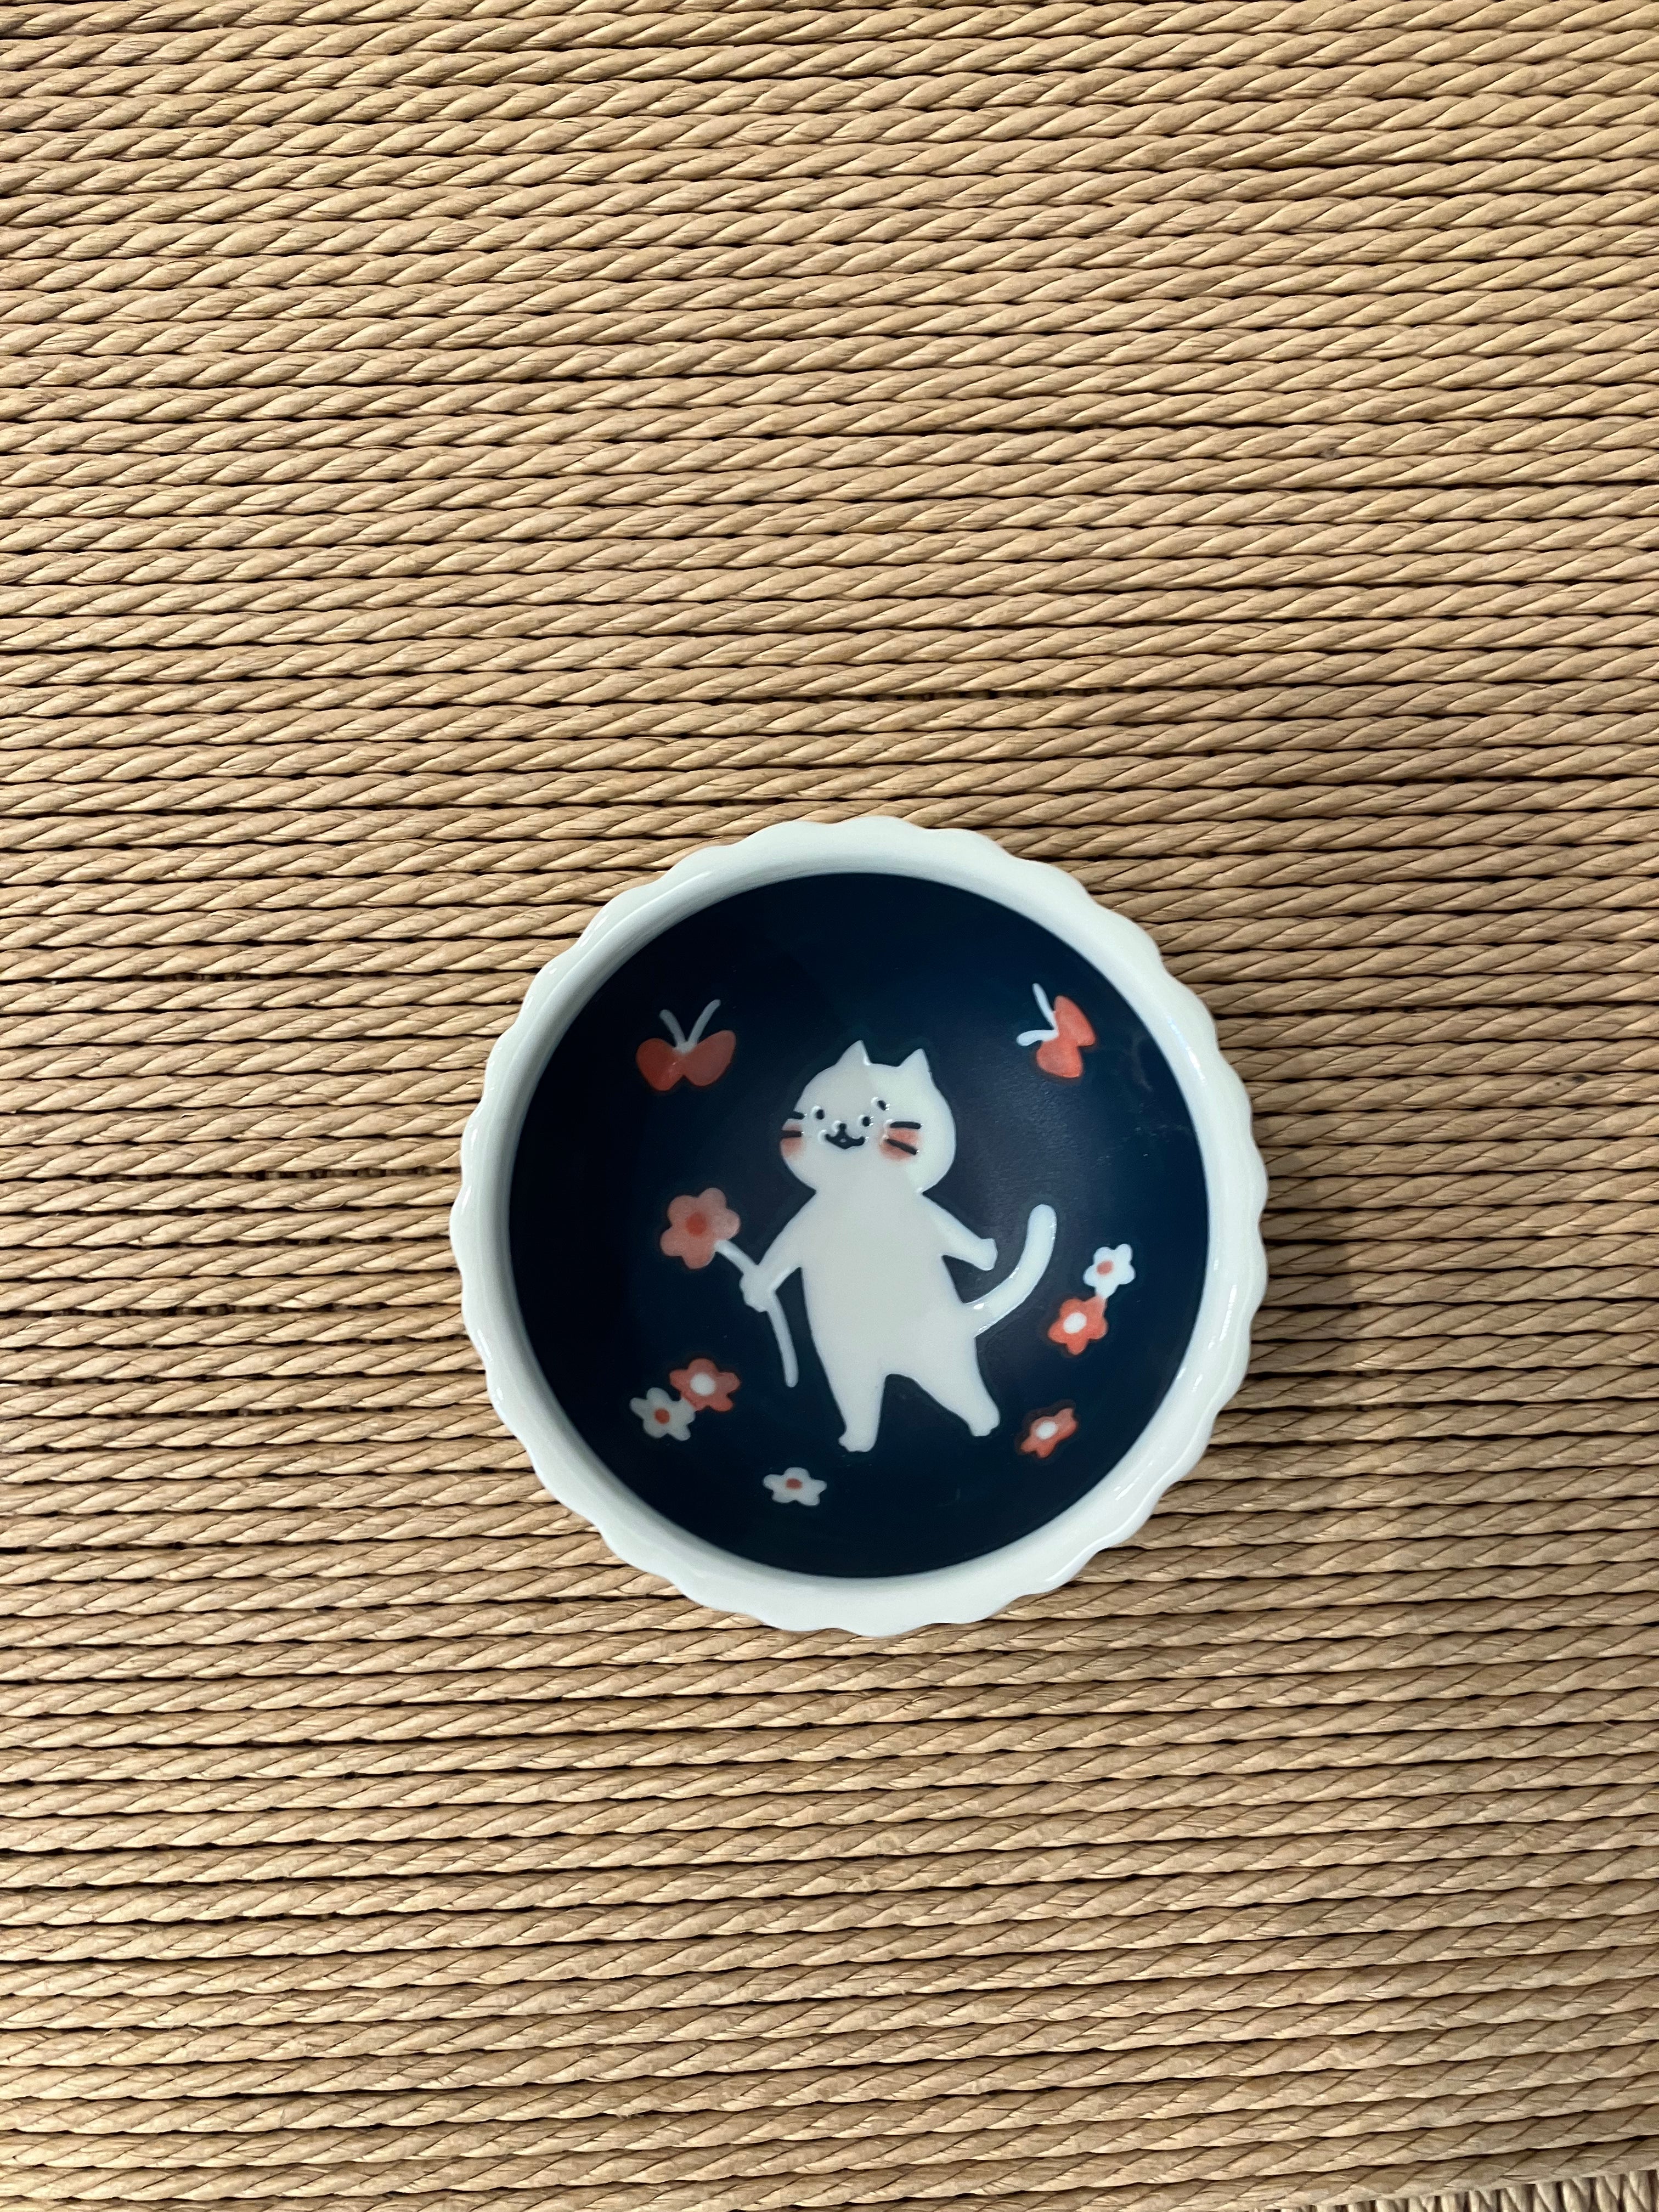 Small bowl with cat, flowers and butterflies